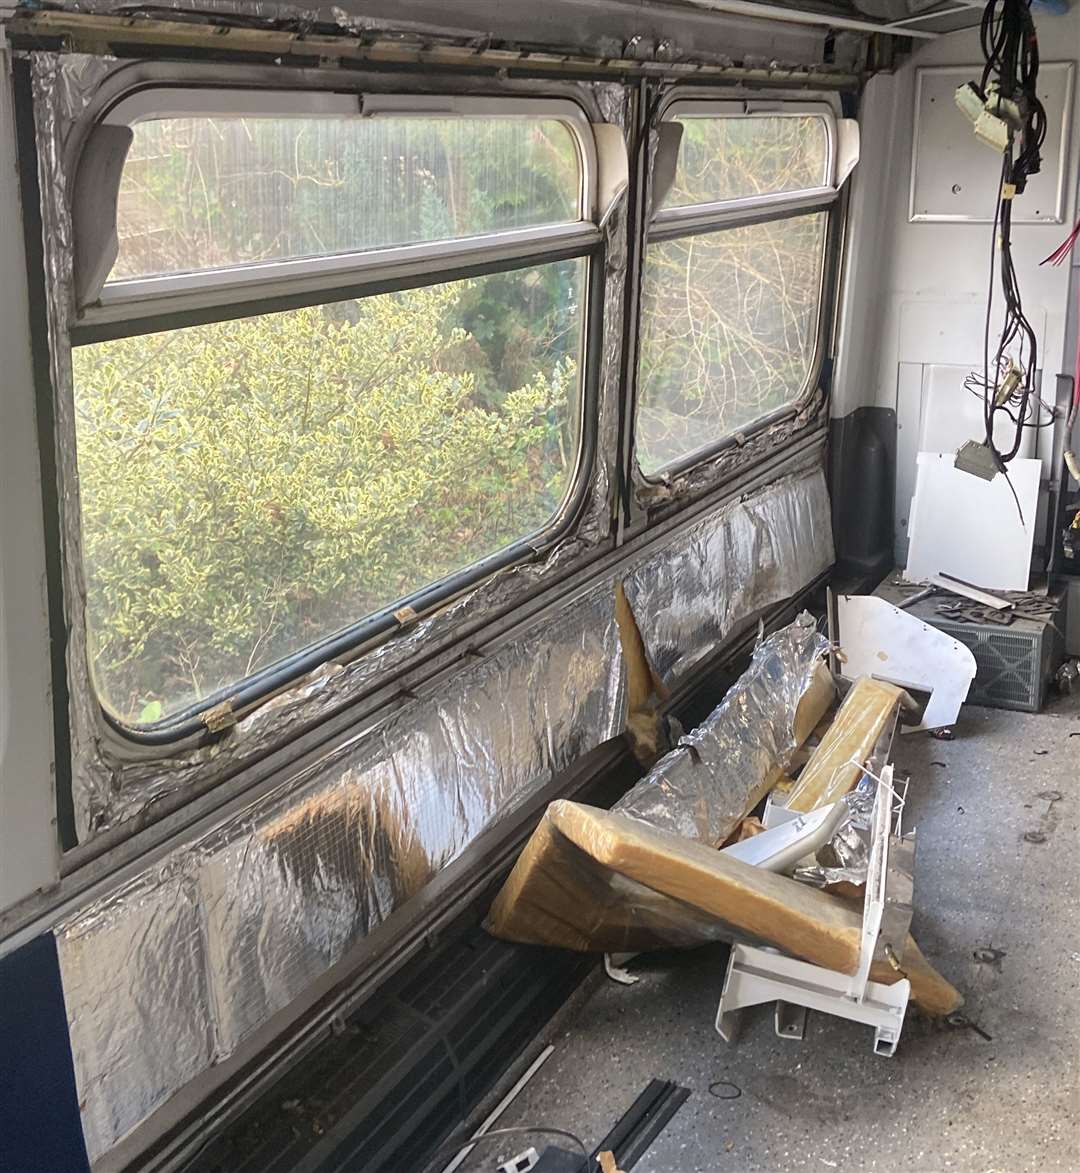 Inside the train carriages, before they were revamped. Picture: Matthew Plews